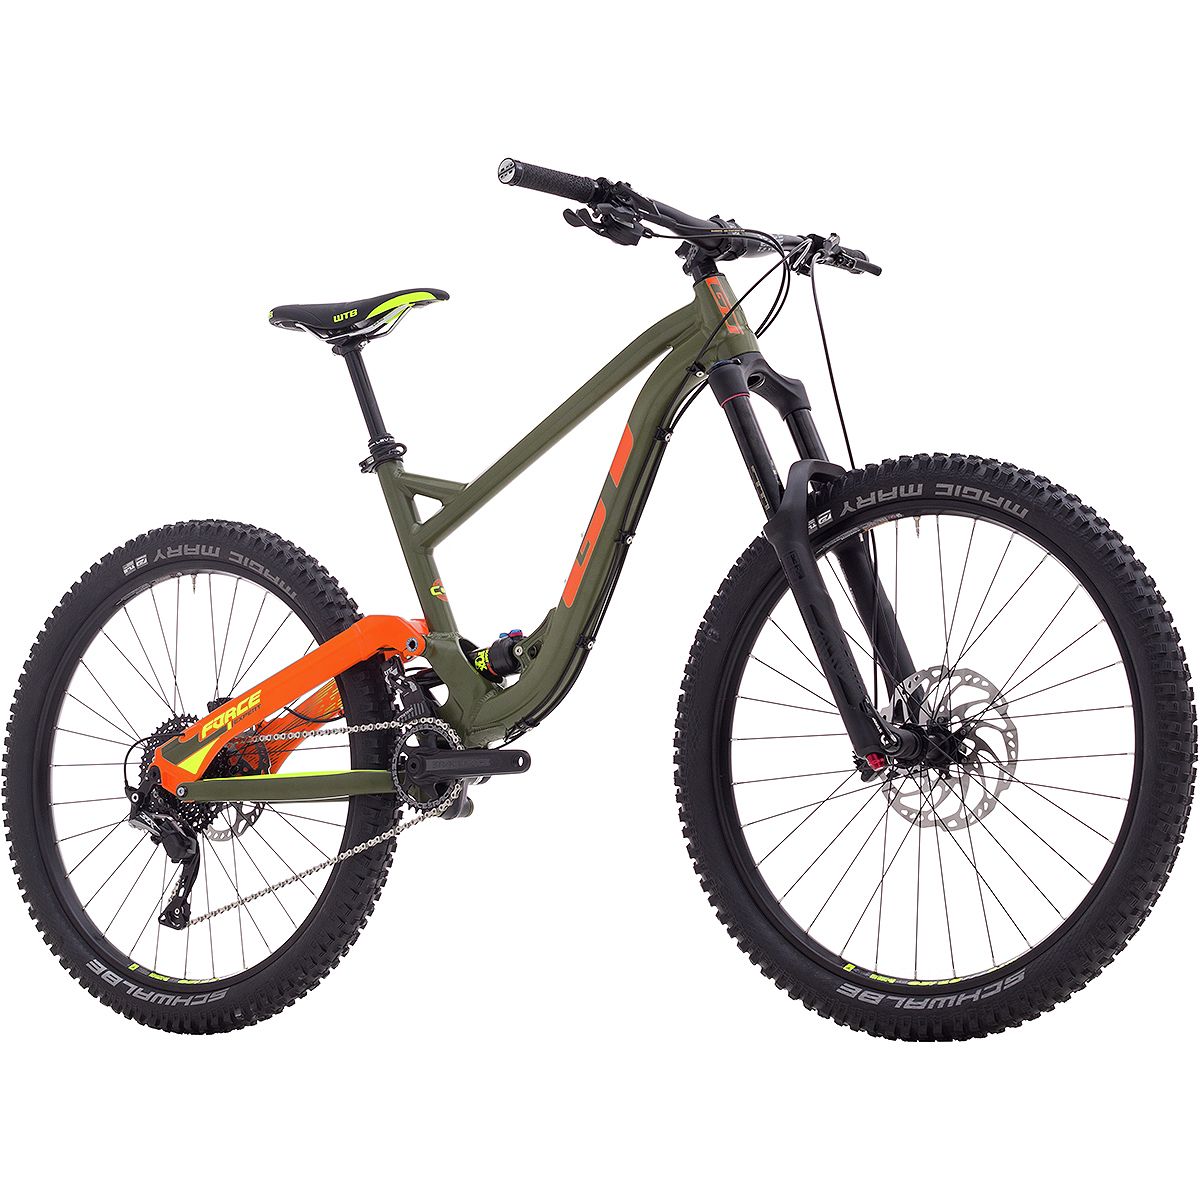 GT Force Alloy Expert Complete Mountain Bike 2017